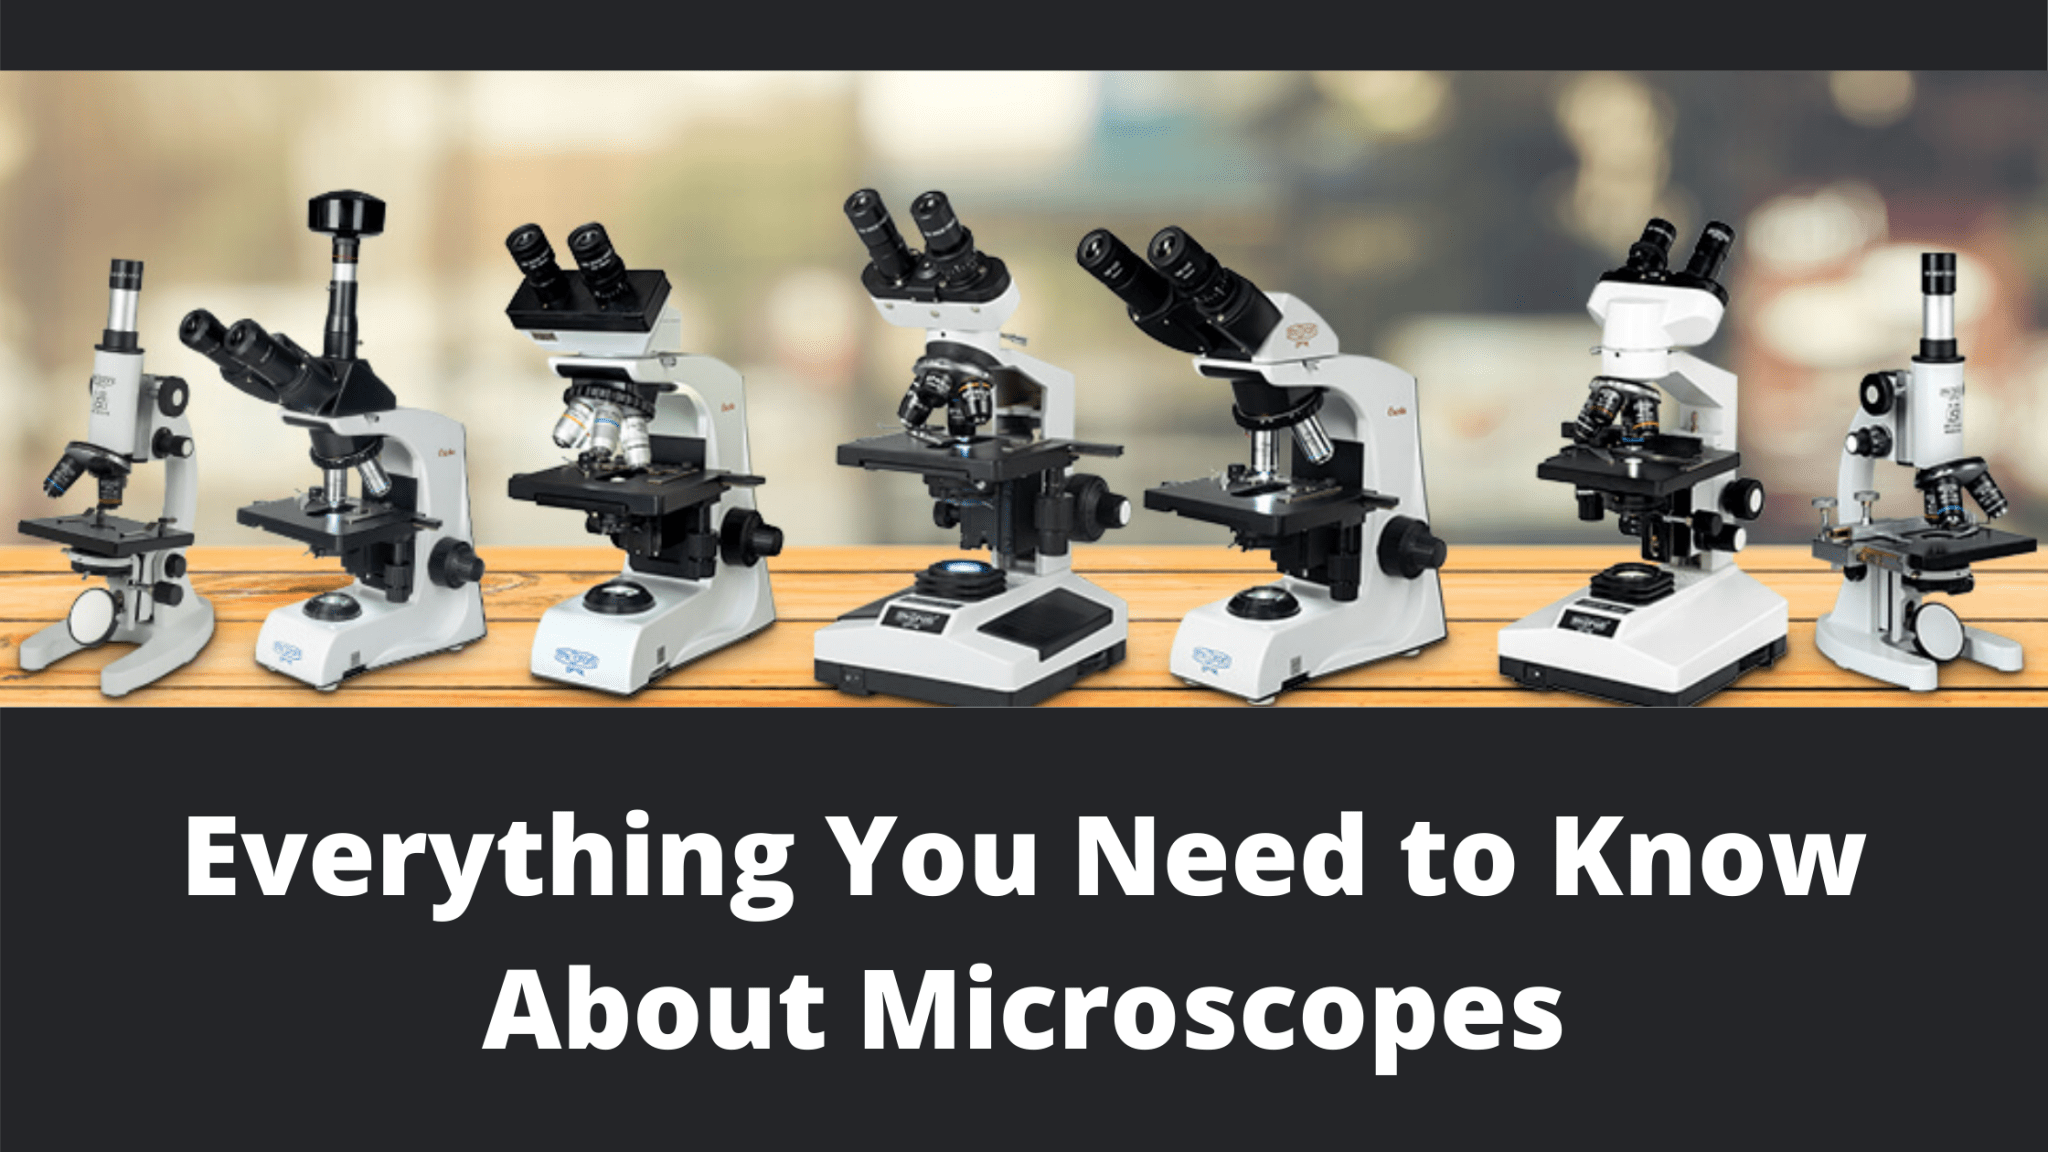 List two jobs where microscopes are used